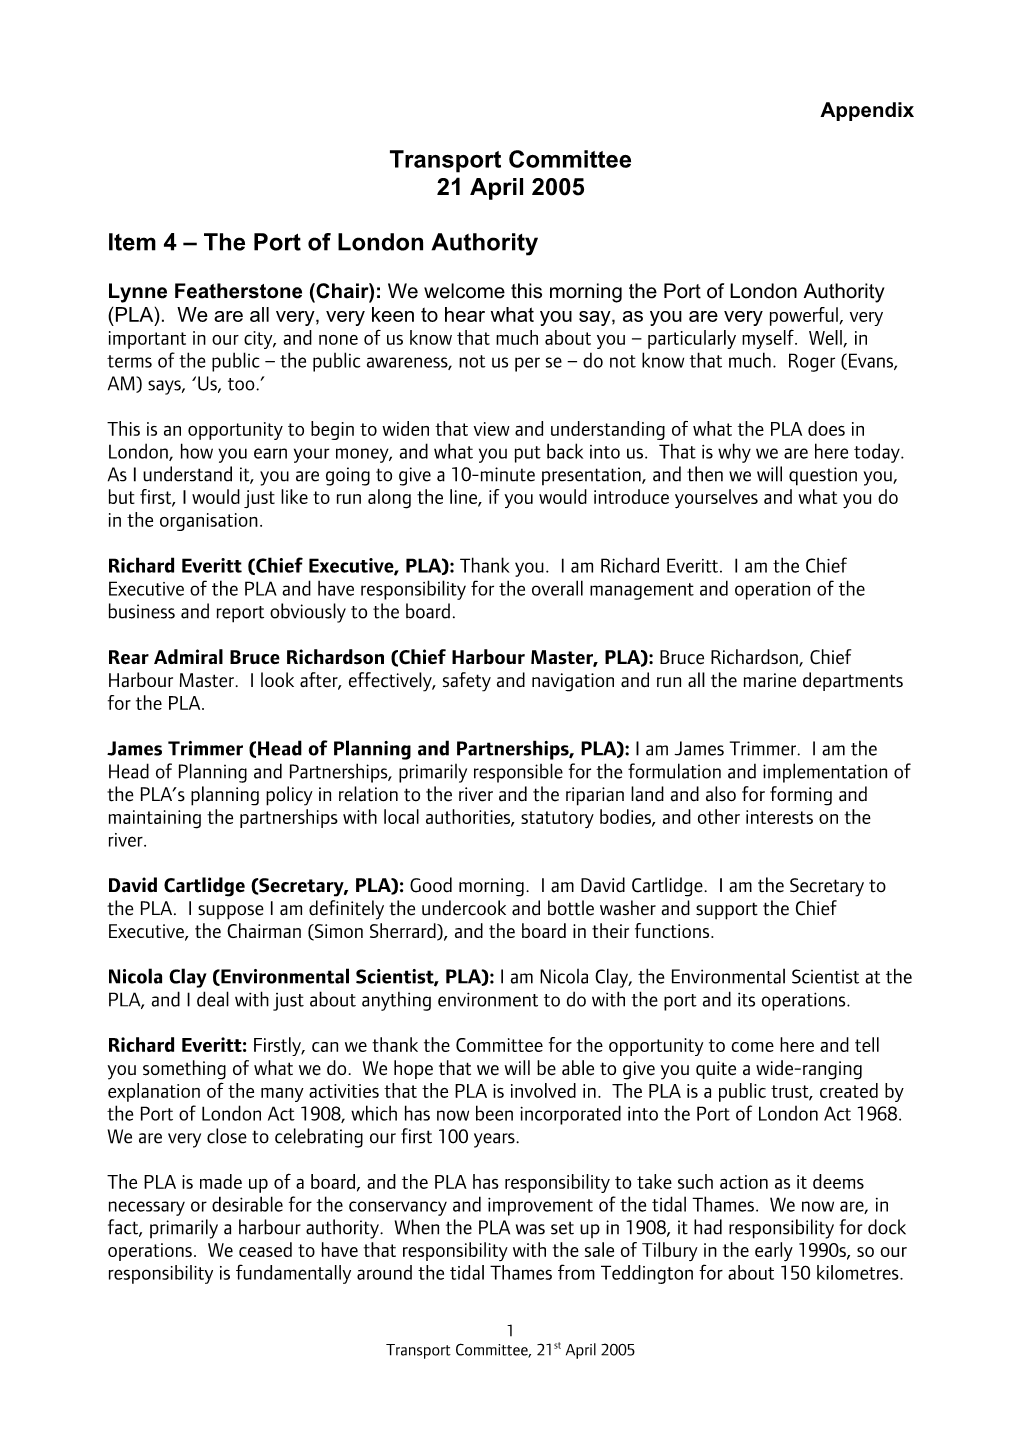 The Port of London Authority